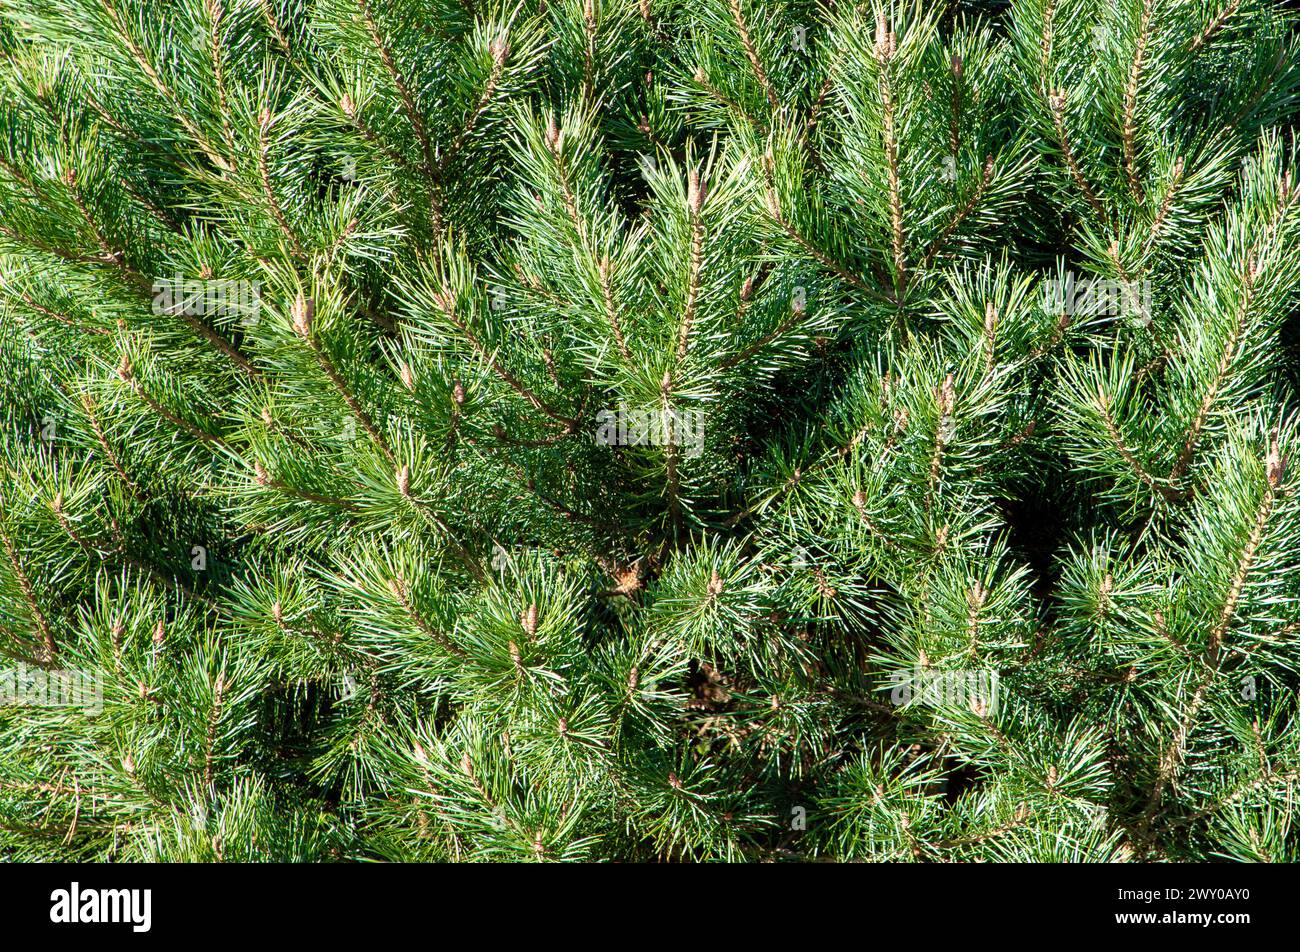 A close-up with many branches of Pinus pumila tree Stock Photo